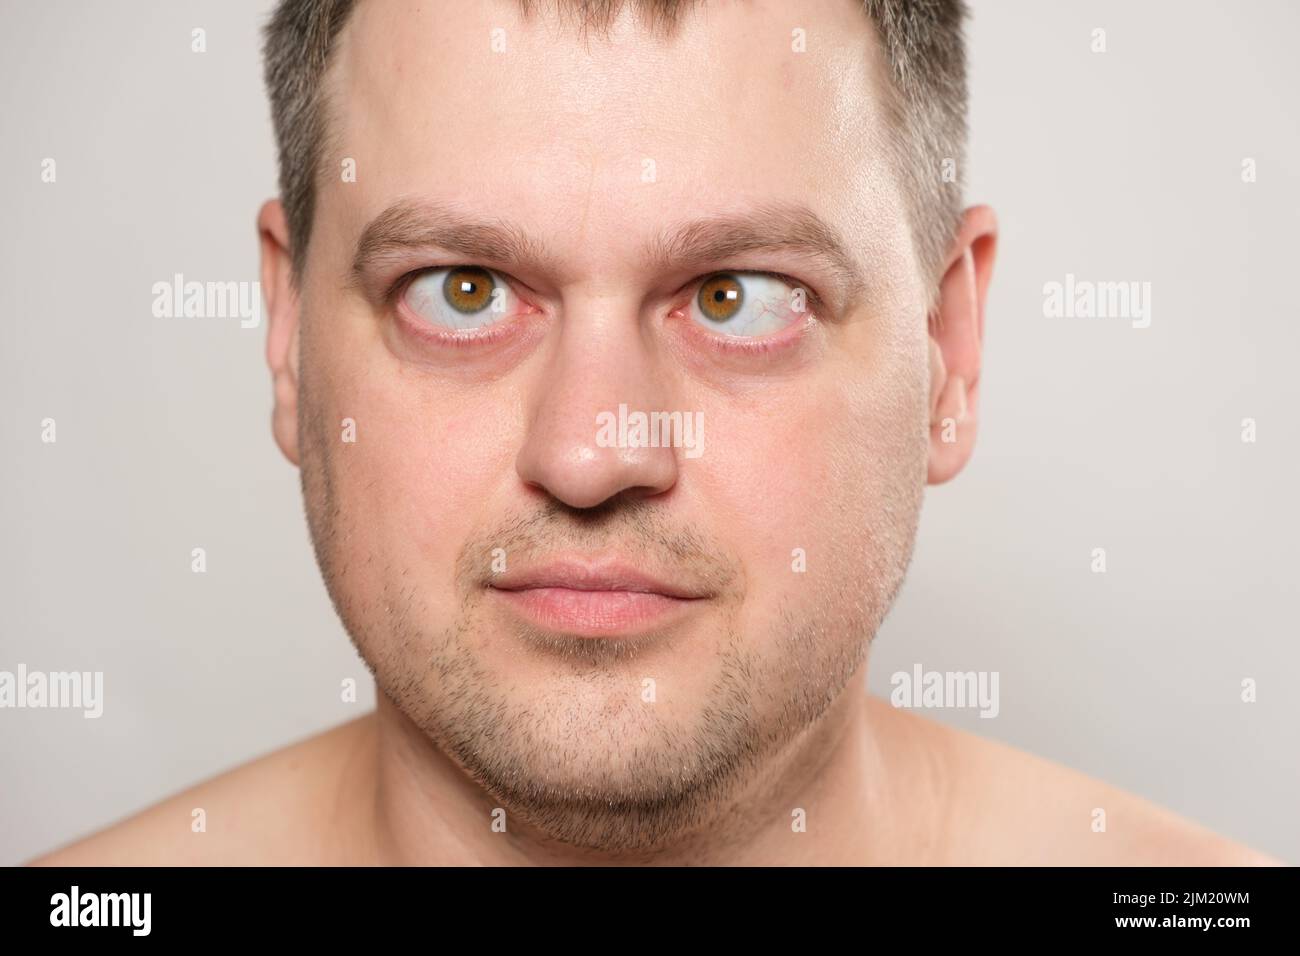 A man with strabismus squints his eyes on a white background. Stock Photo